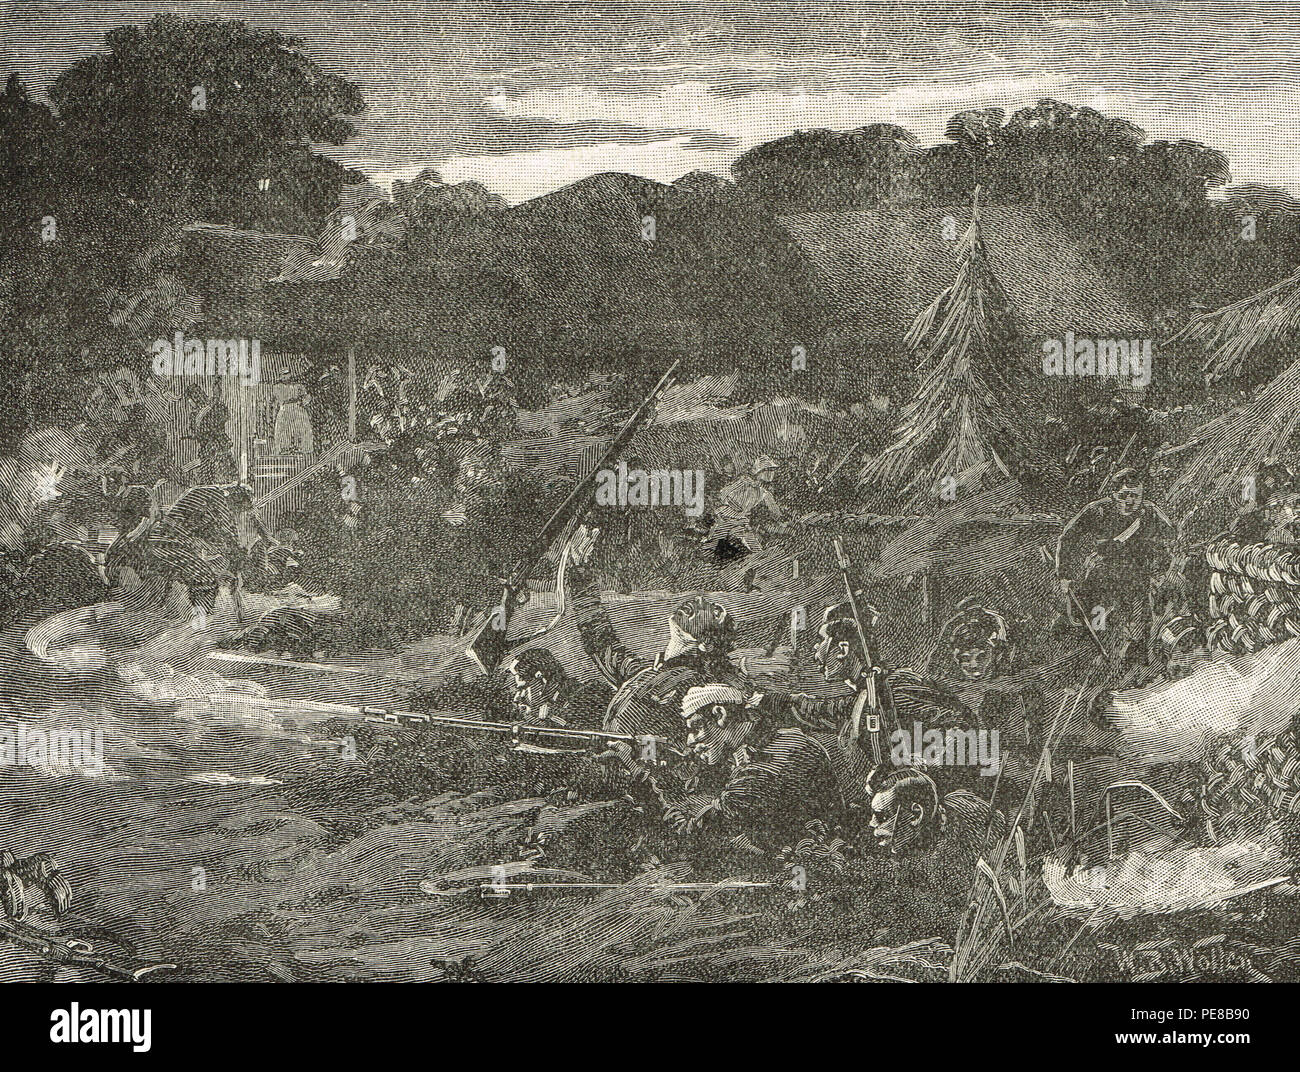 Attack on the British Residency at Manipur, 24 March 1891 Stock Photo